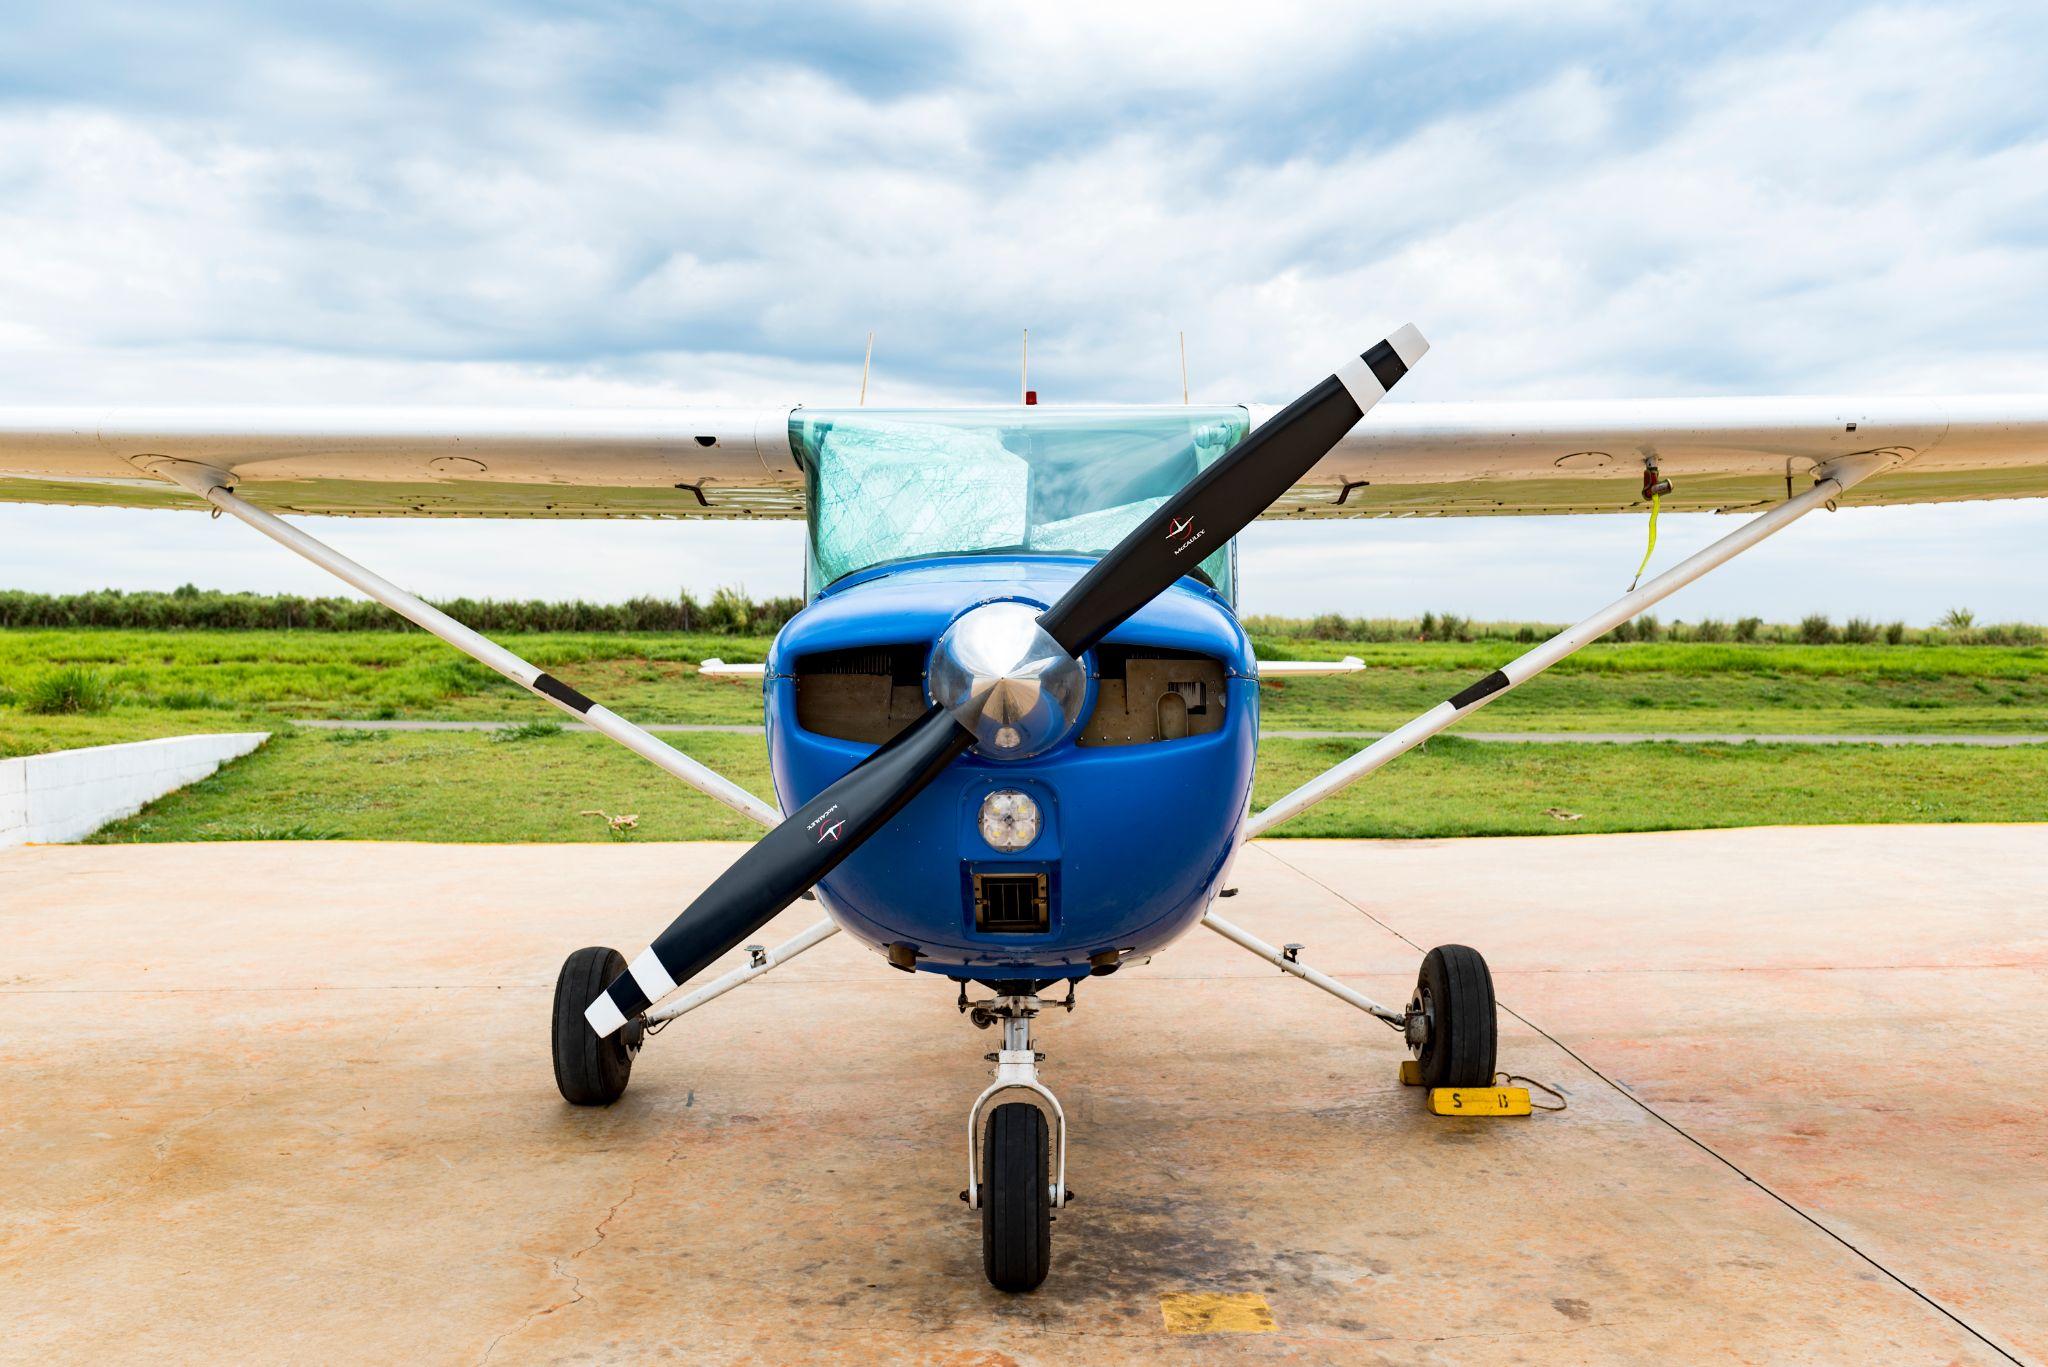 A blue single engine airplane or propeller aircraft on the ground.